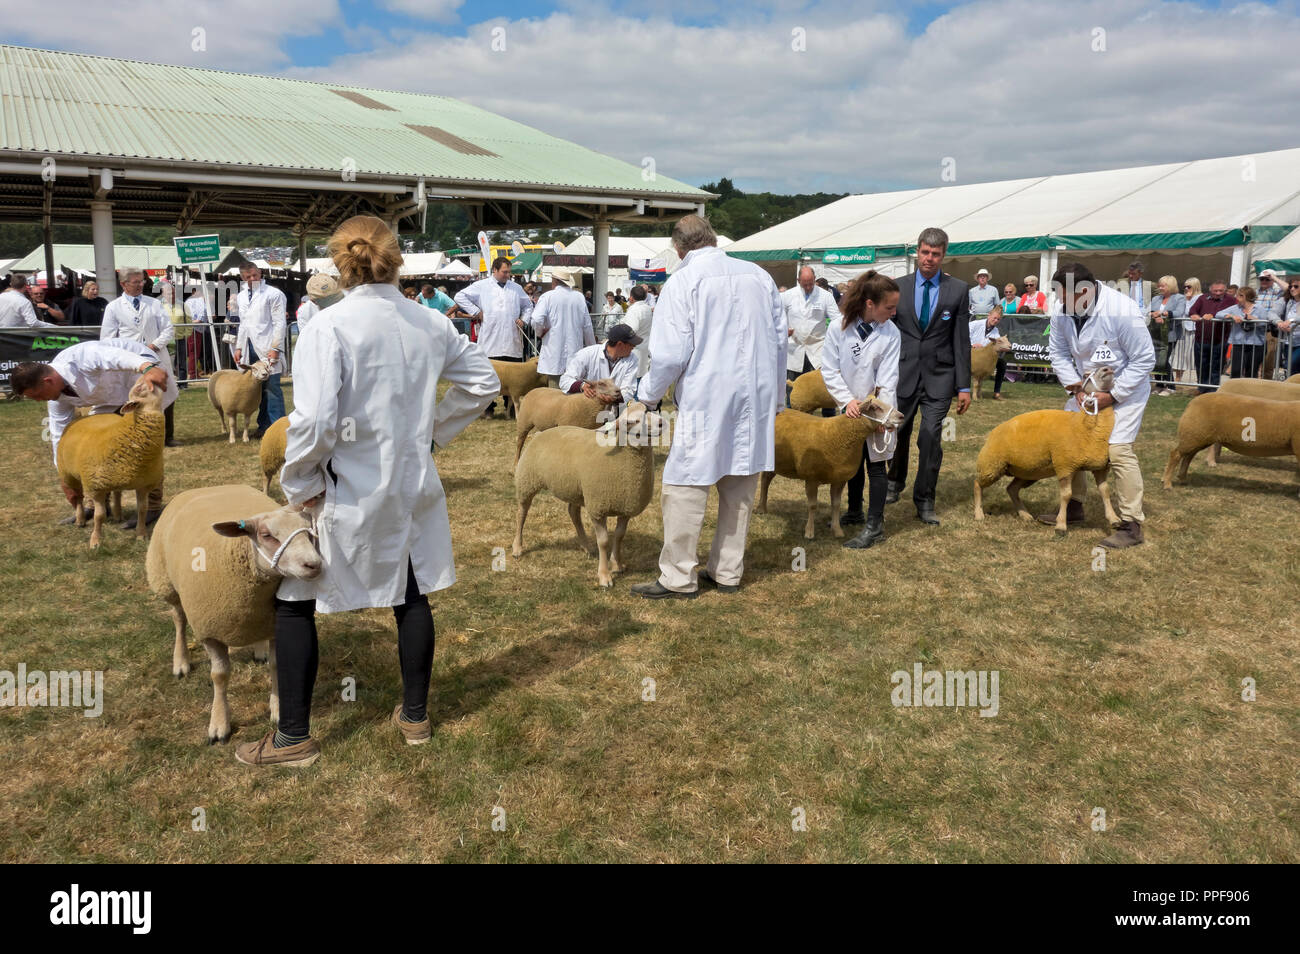 British Charollais sheep judging at the Great Yorkshire Show in summer Harrogate North Yorkshire England UK United Kingdom GB Great Britain Stock Photo